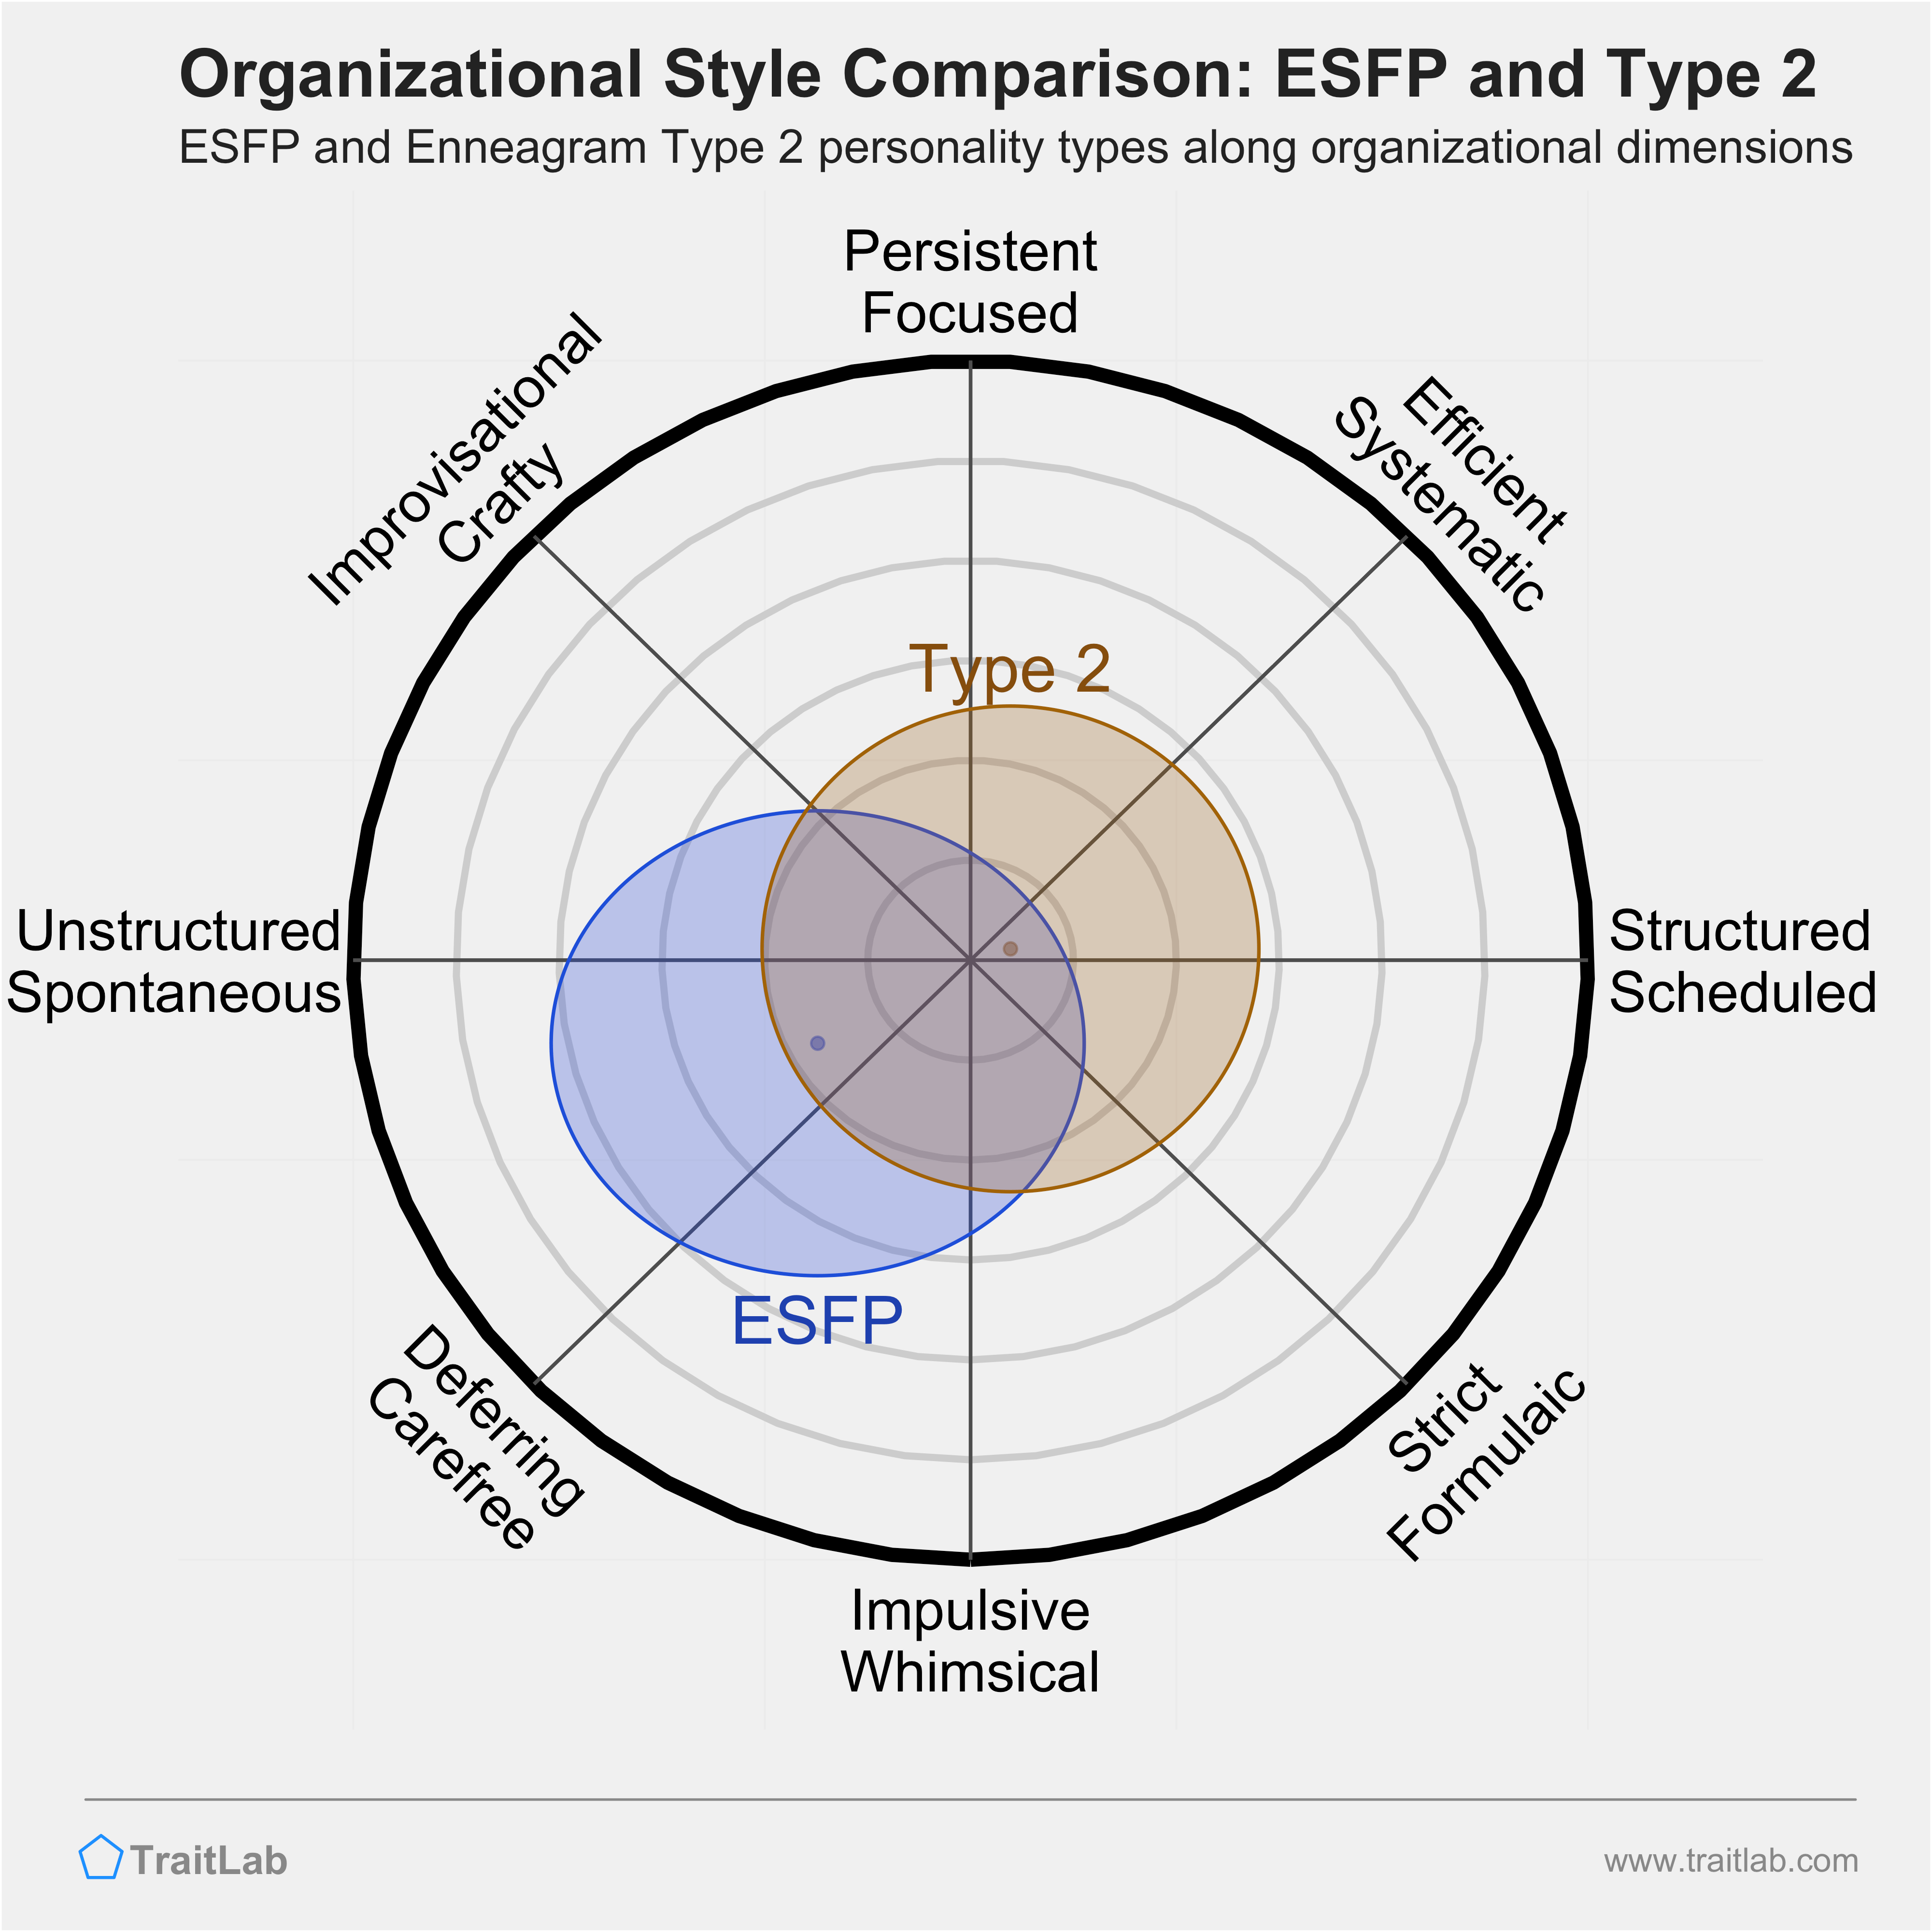 ESFP and Type 2 comparison across organizational dimensions